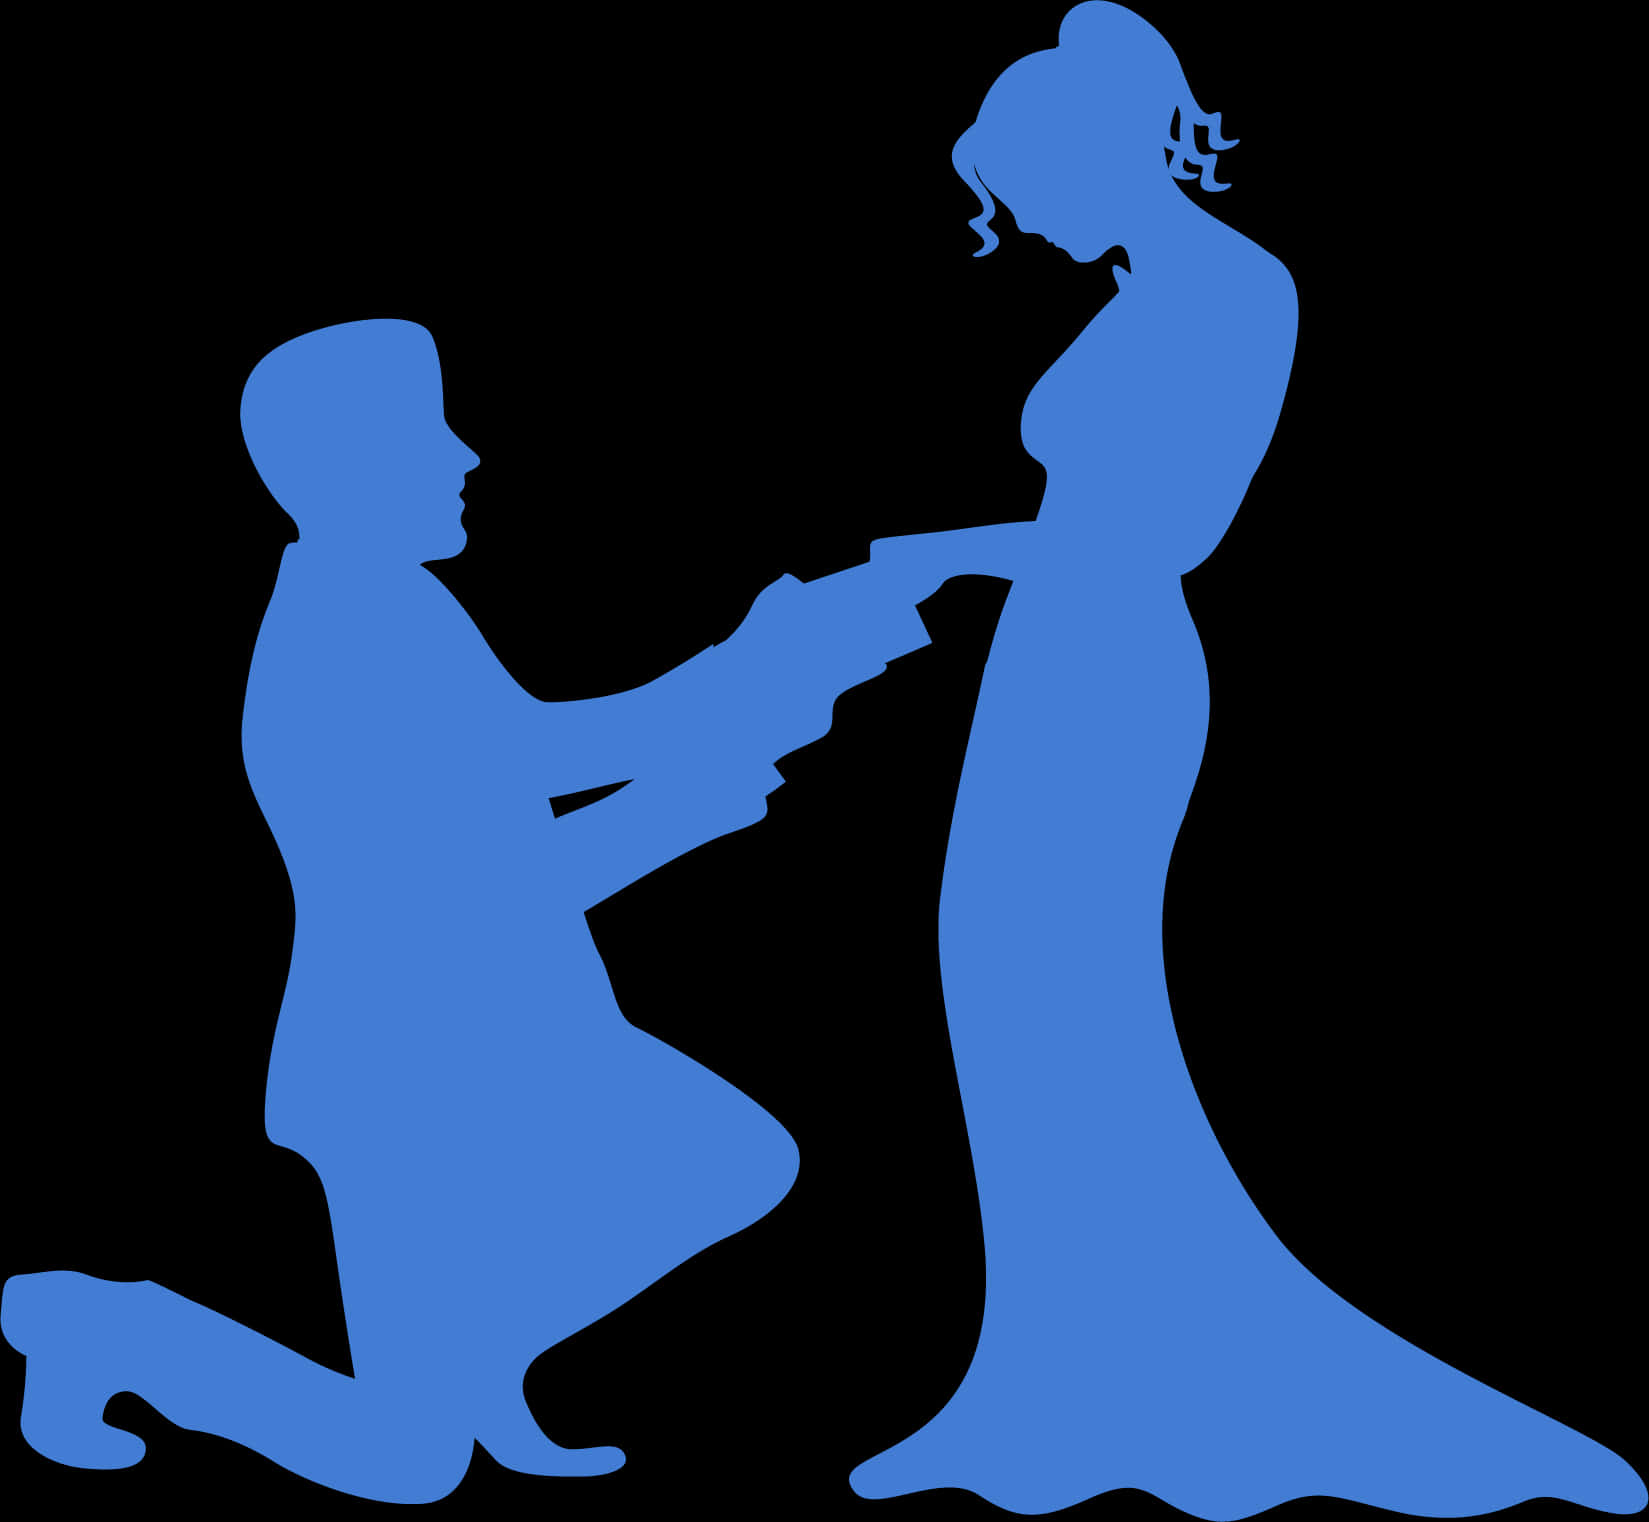 A Man Kneeling On His Knee And Kneeling On His Knee With A Woman In A Dress